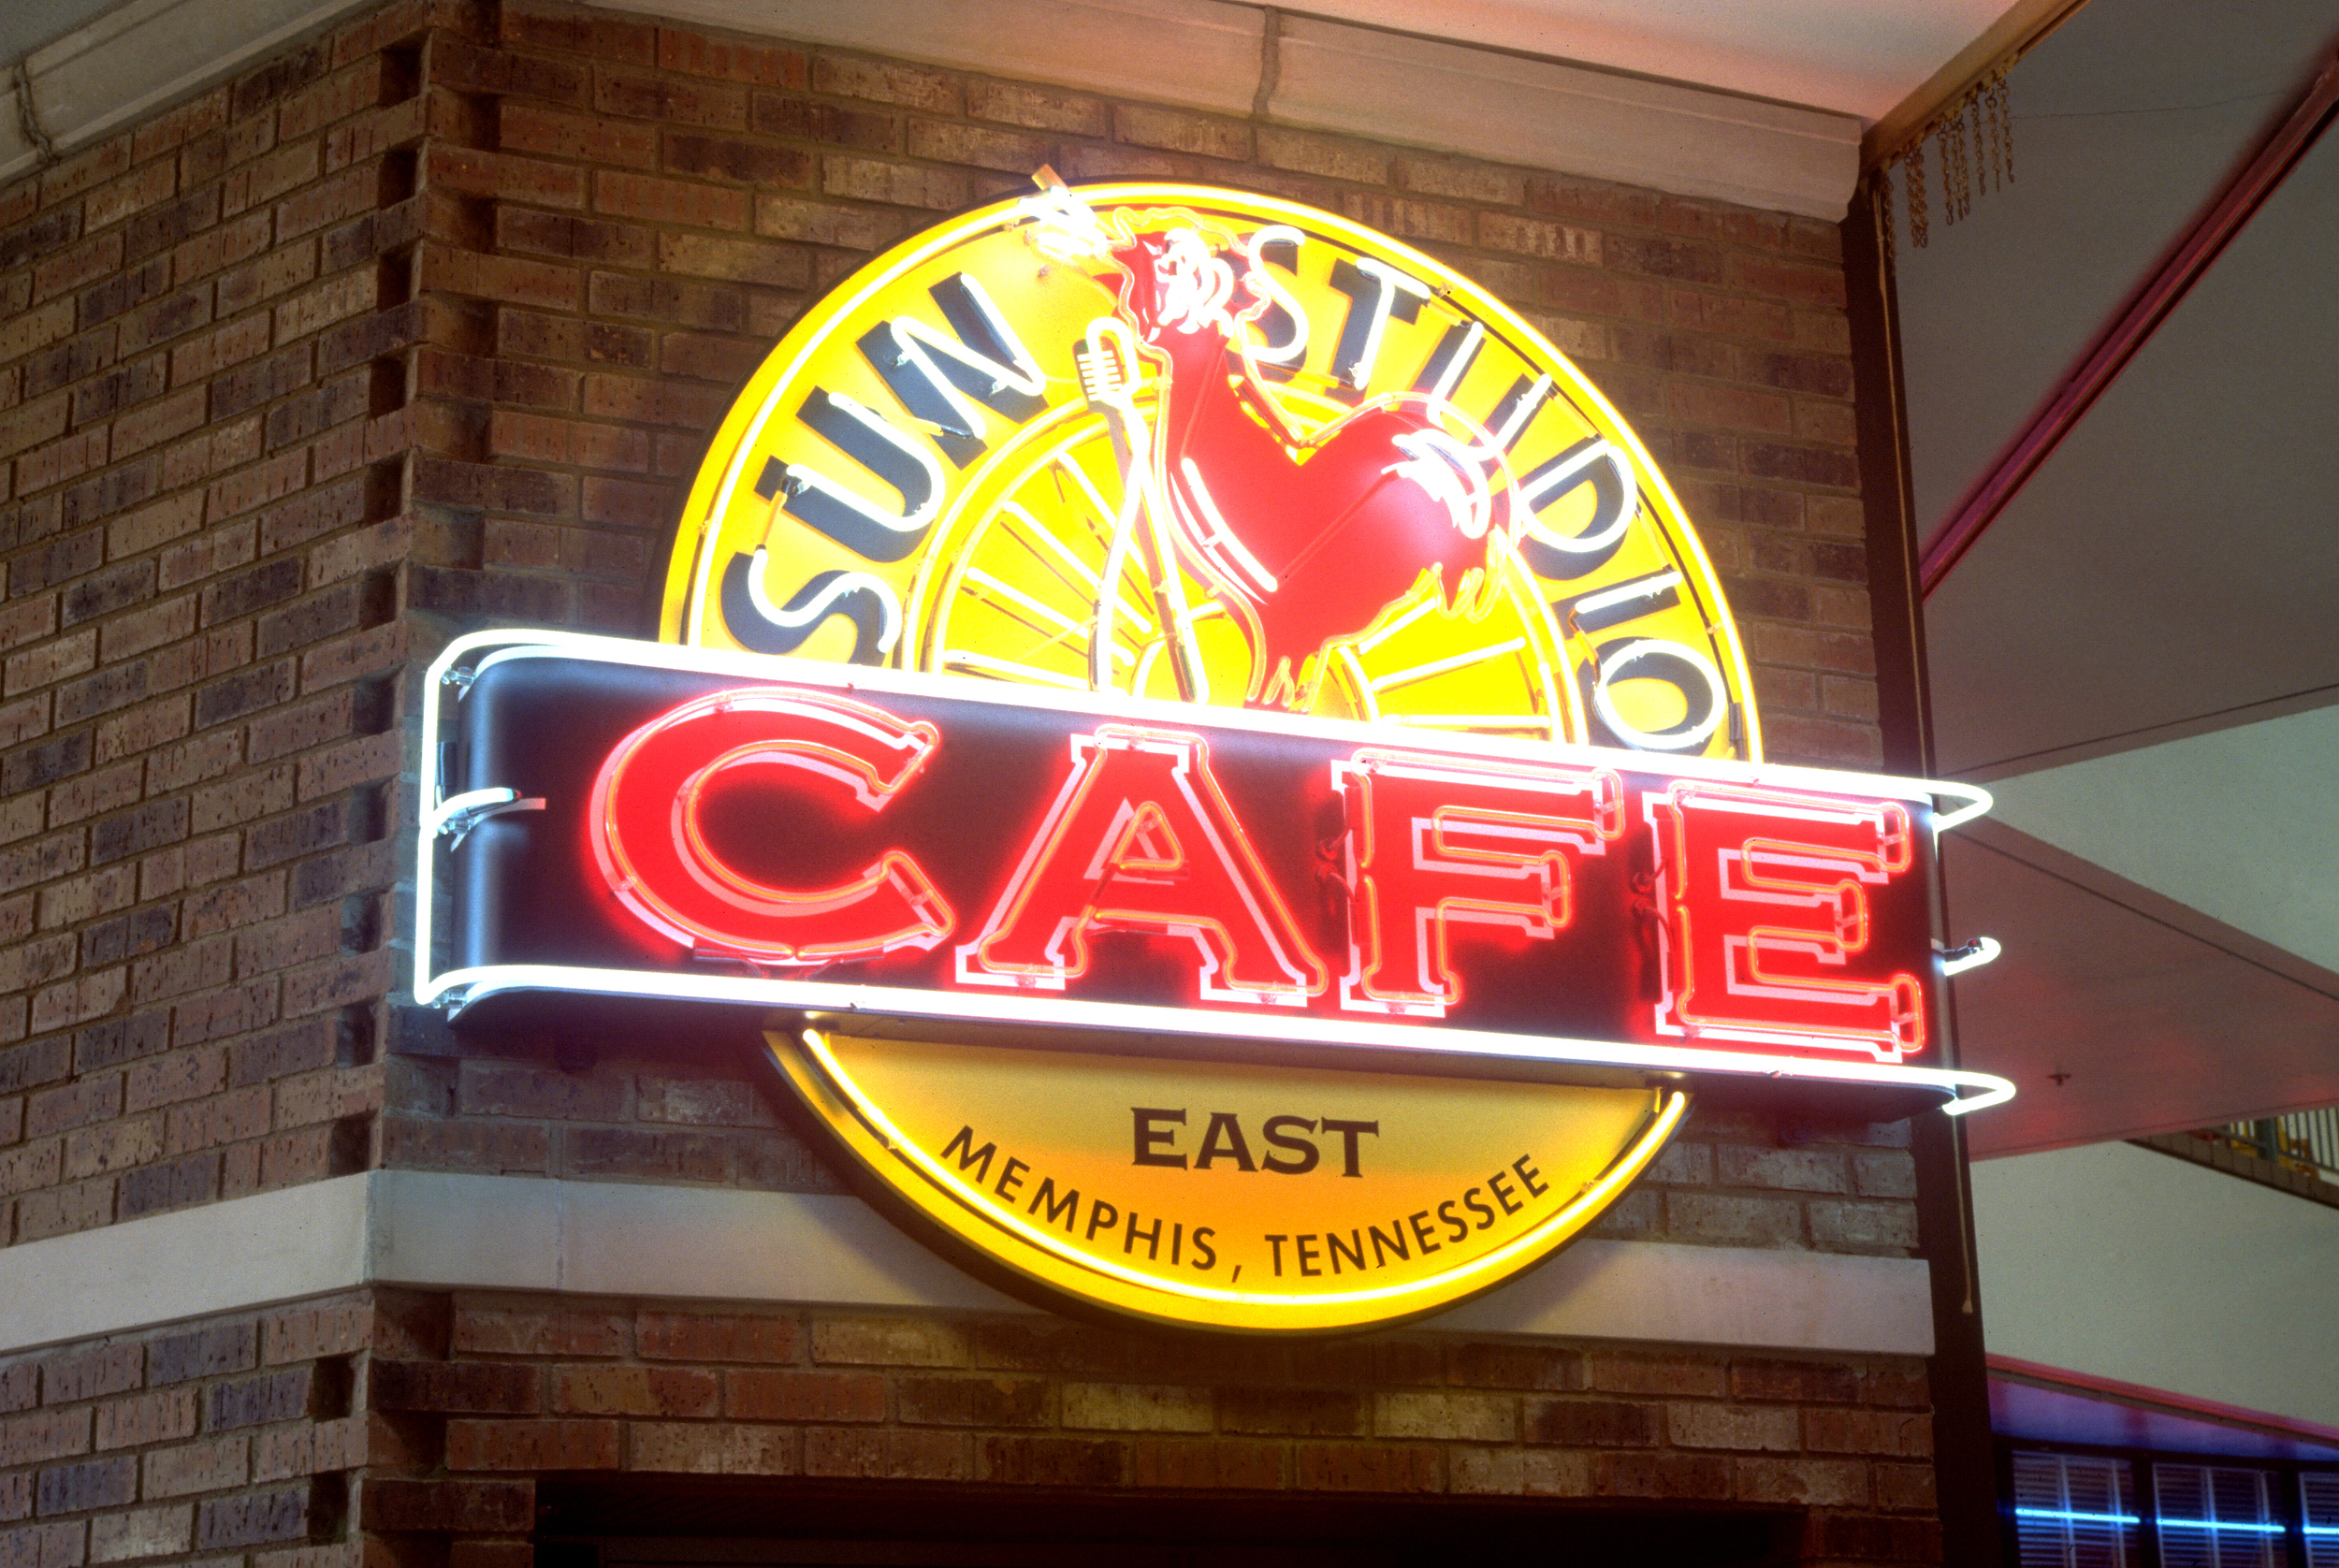  Sun Studio Cafe entrance signage  Branding creative and design by Chuck Mitchell  Sign fabrication and installation by Frank Balton Sign Company Memphis  NOTE: This prototype franchise location is closed. Please visit the original Sun Studio in Memp